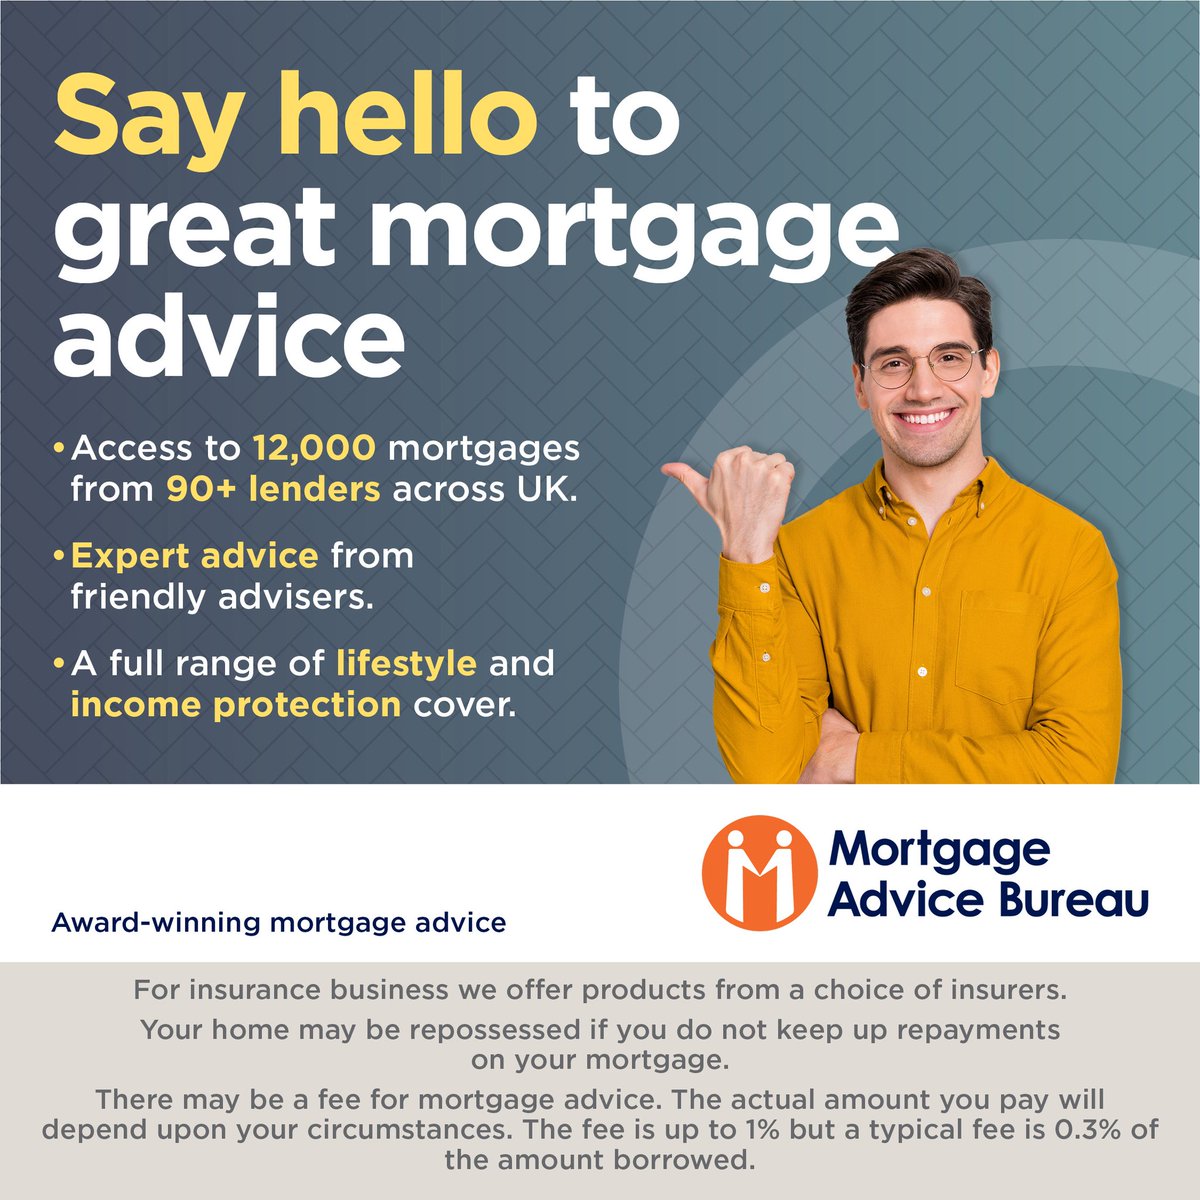 Say hello to great mortgage advice 👋

But what are the benefits of using a mortgage adviser? Read our below article to find out more 👇

🔗ow.ly/K5kL50PAfRb

#mortgageadvice #mortgageadviser #mortgageadvicebureau #brokervsbank #sayhello